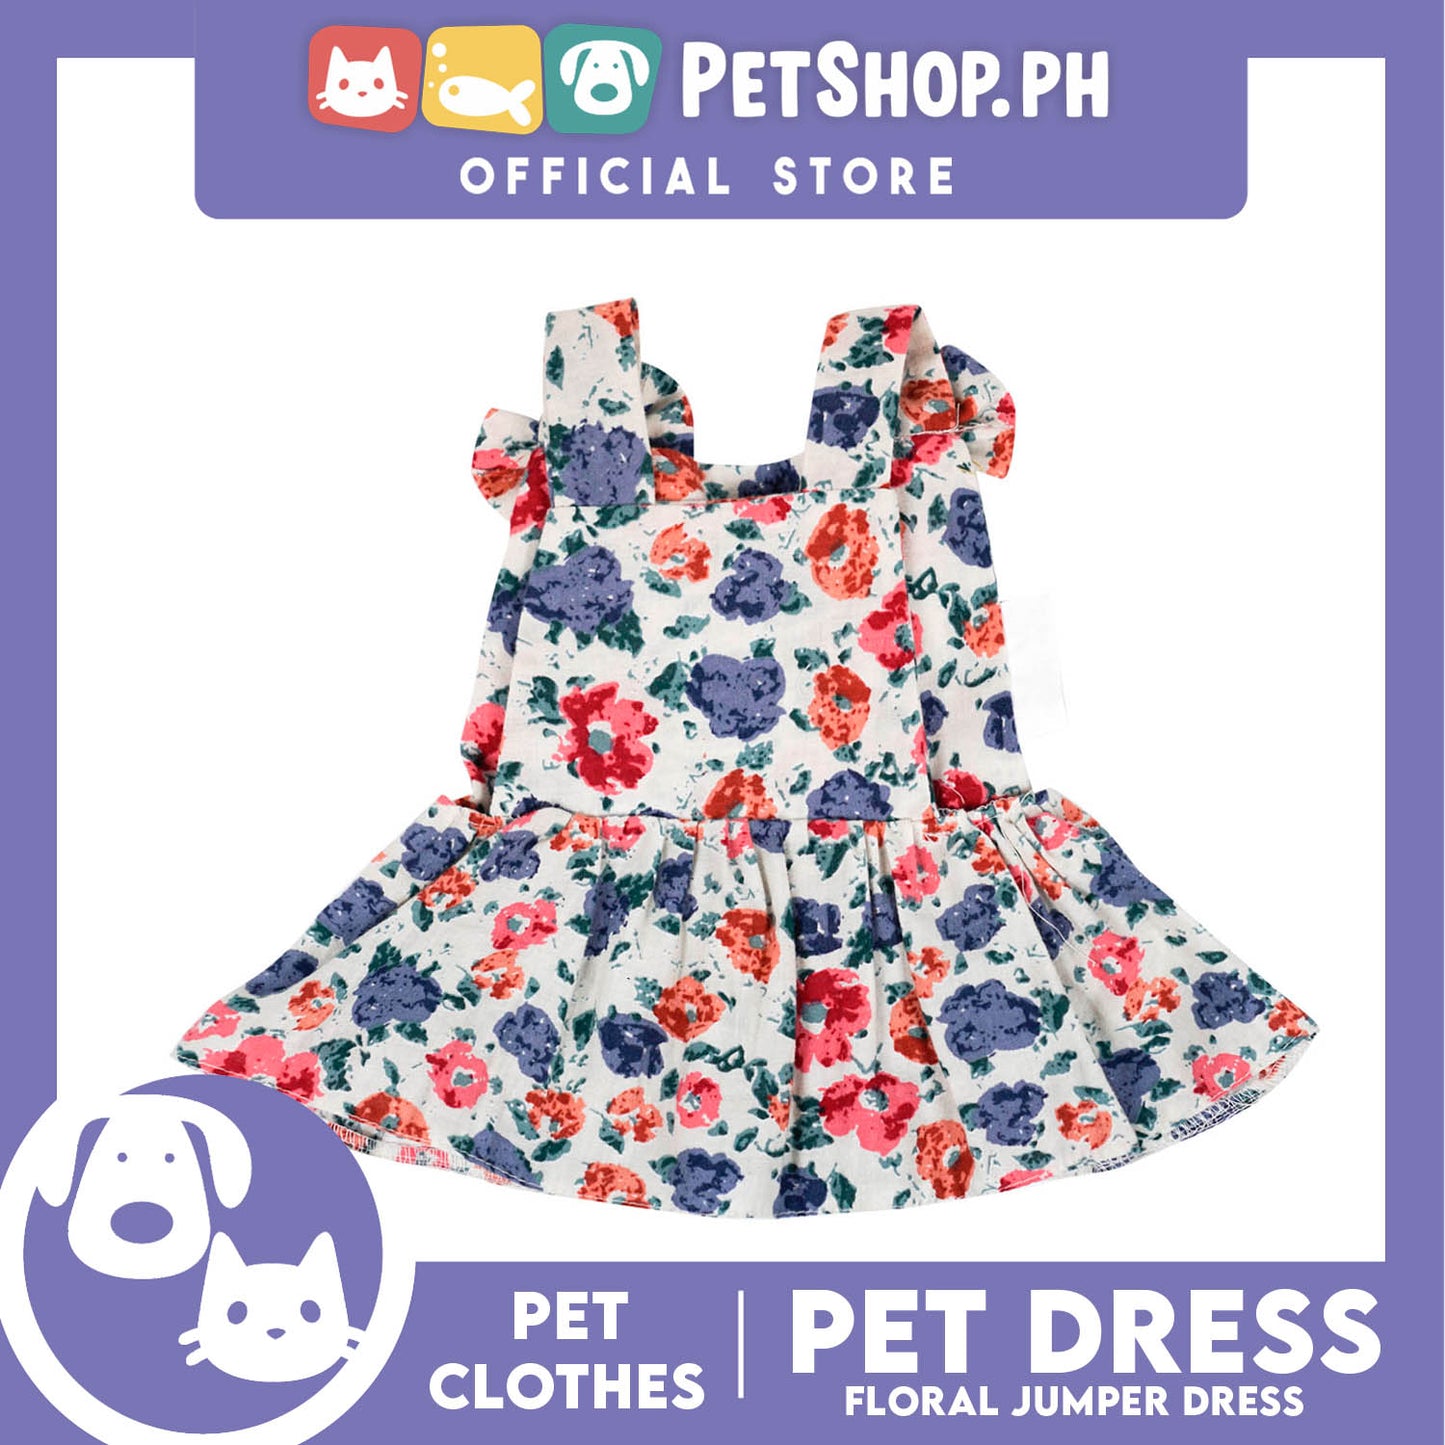 Pet Dress Dog Floral Jumper with Ribbon  (Small) Pet Shirt Dress Perfect Fit for Dogs